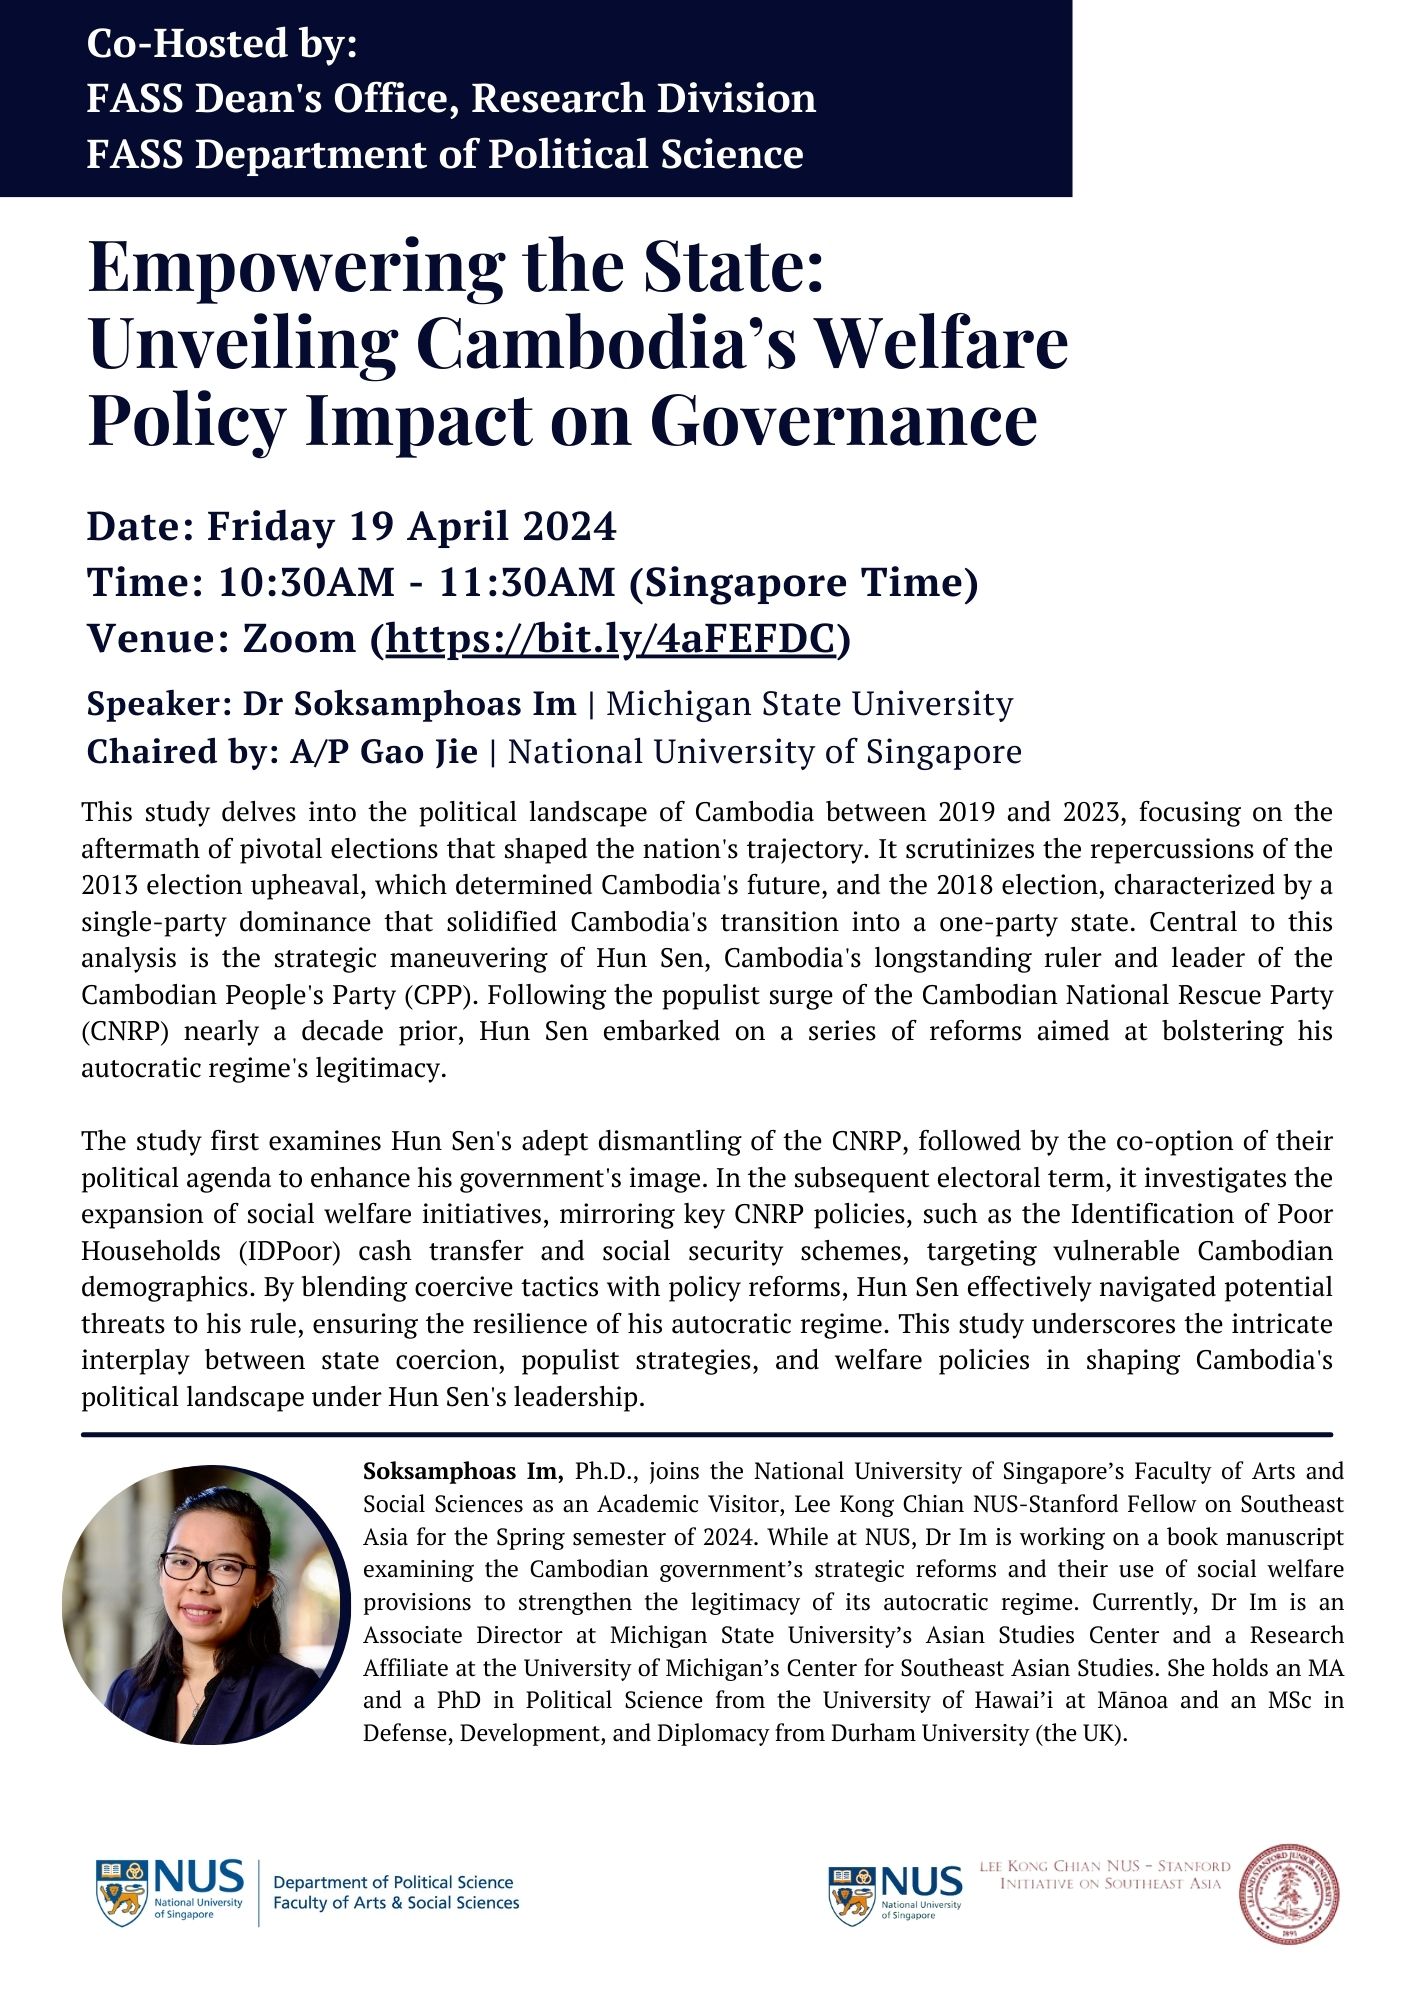 Empowering the State Unveiling Cambodia’s Welfare Policy Impact on Governance